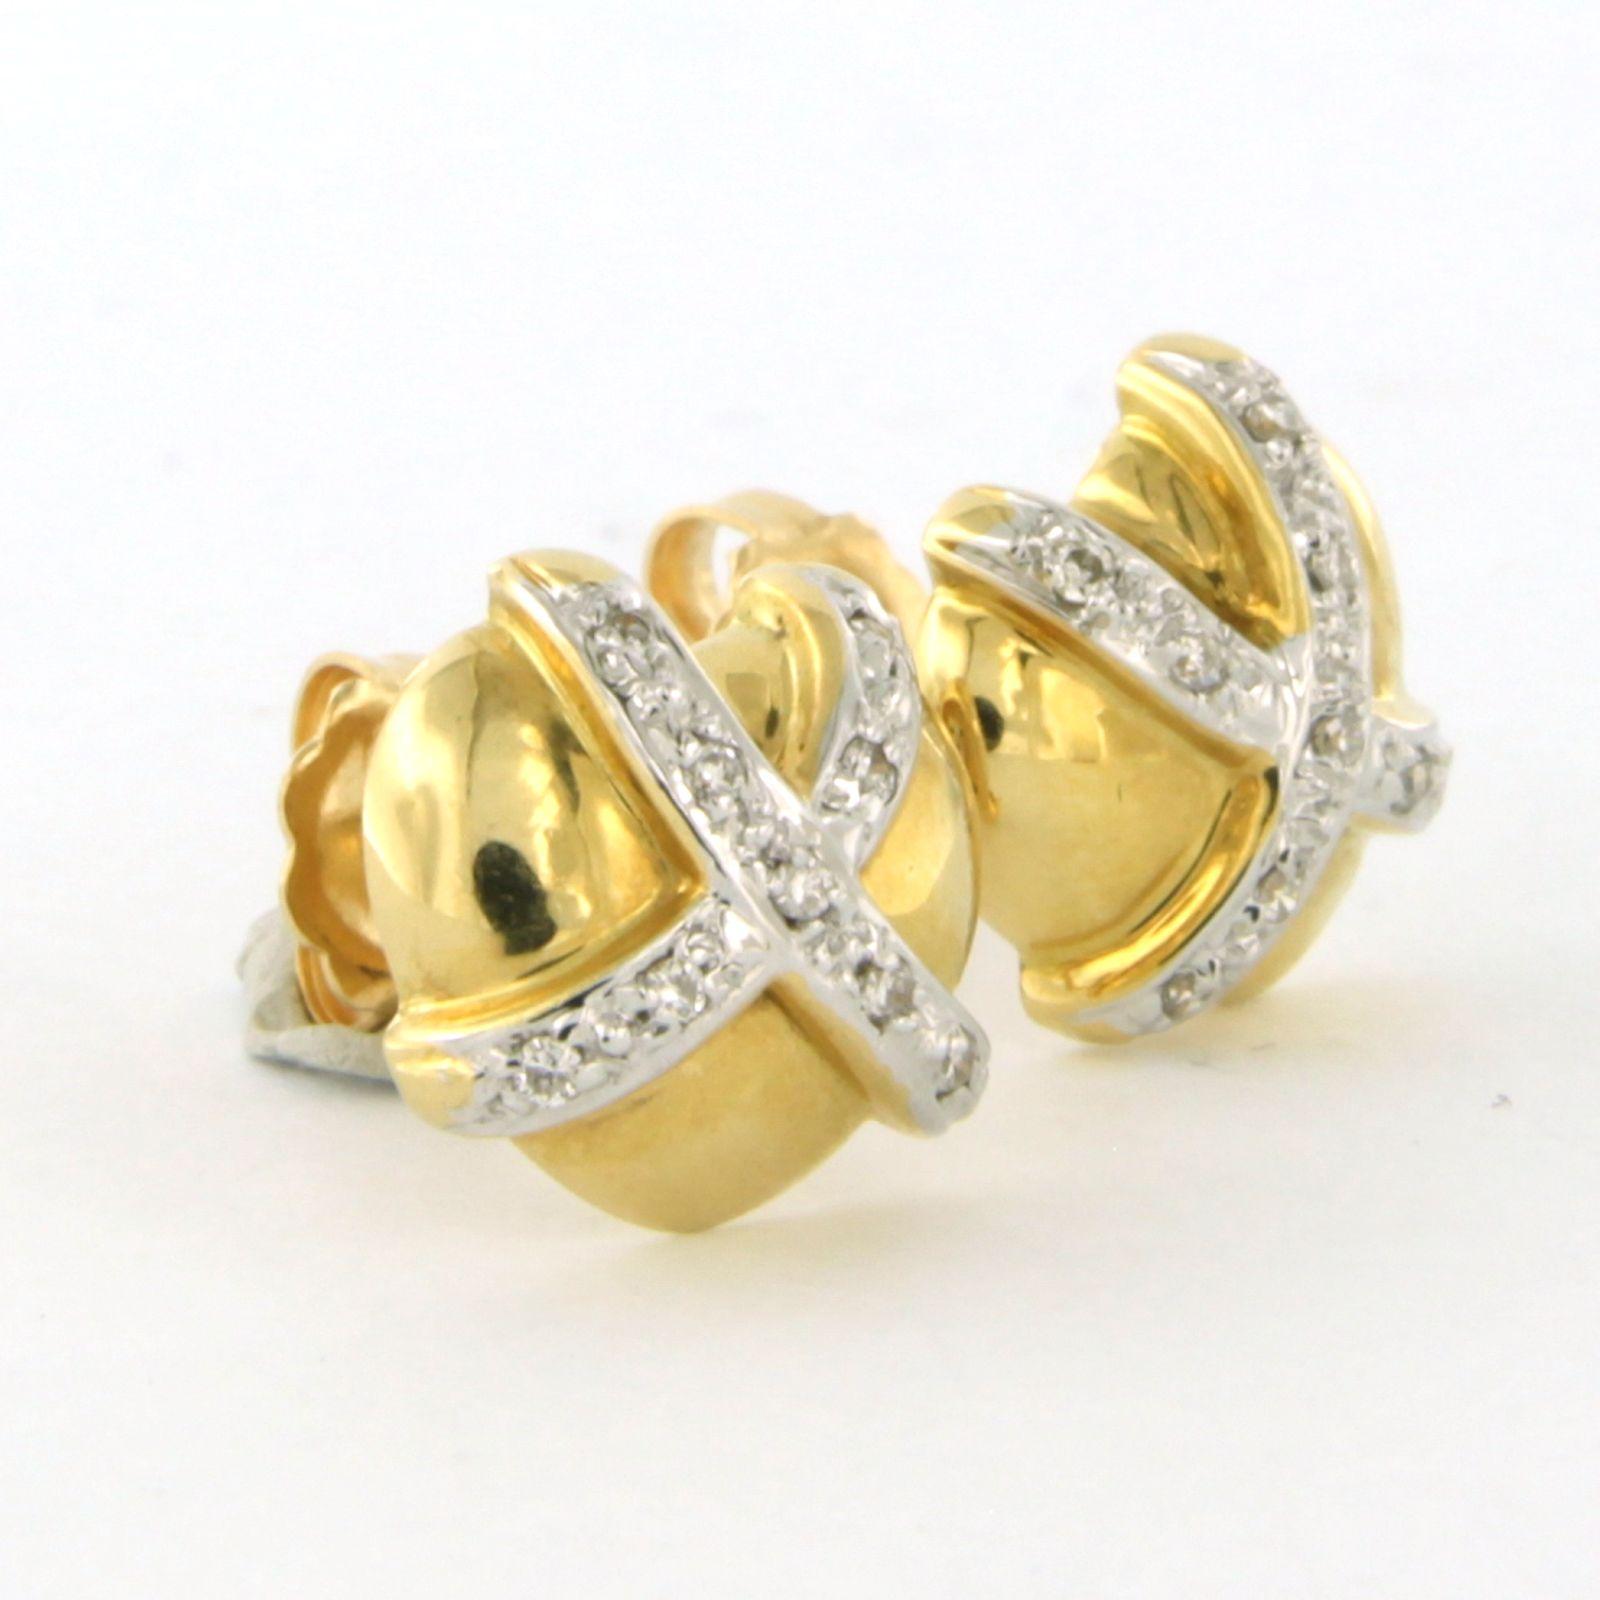 Earrings studs set with diamonds 18k bicolour gold In Excellent Condition For Sale In The Hague, ZH